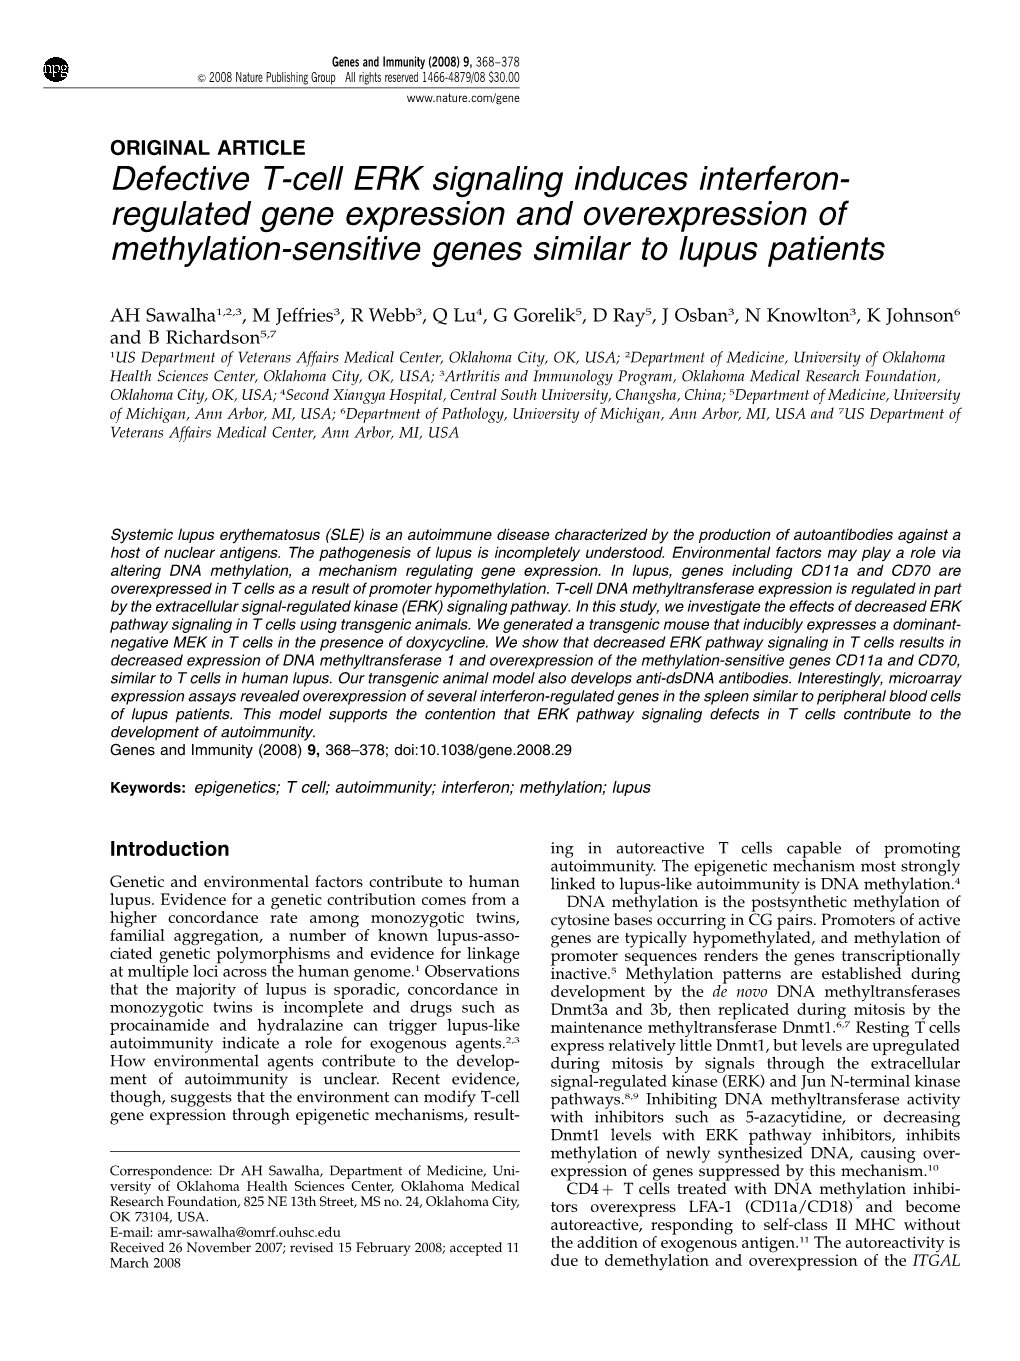 Regulated Gene Expression and Overexpression of Methylation-Sensitive Genes Similar to Lupus Patients